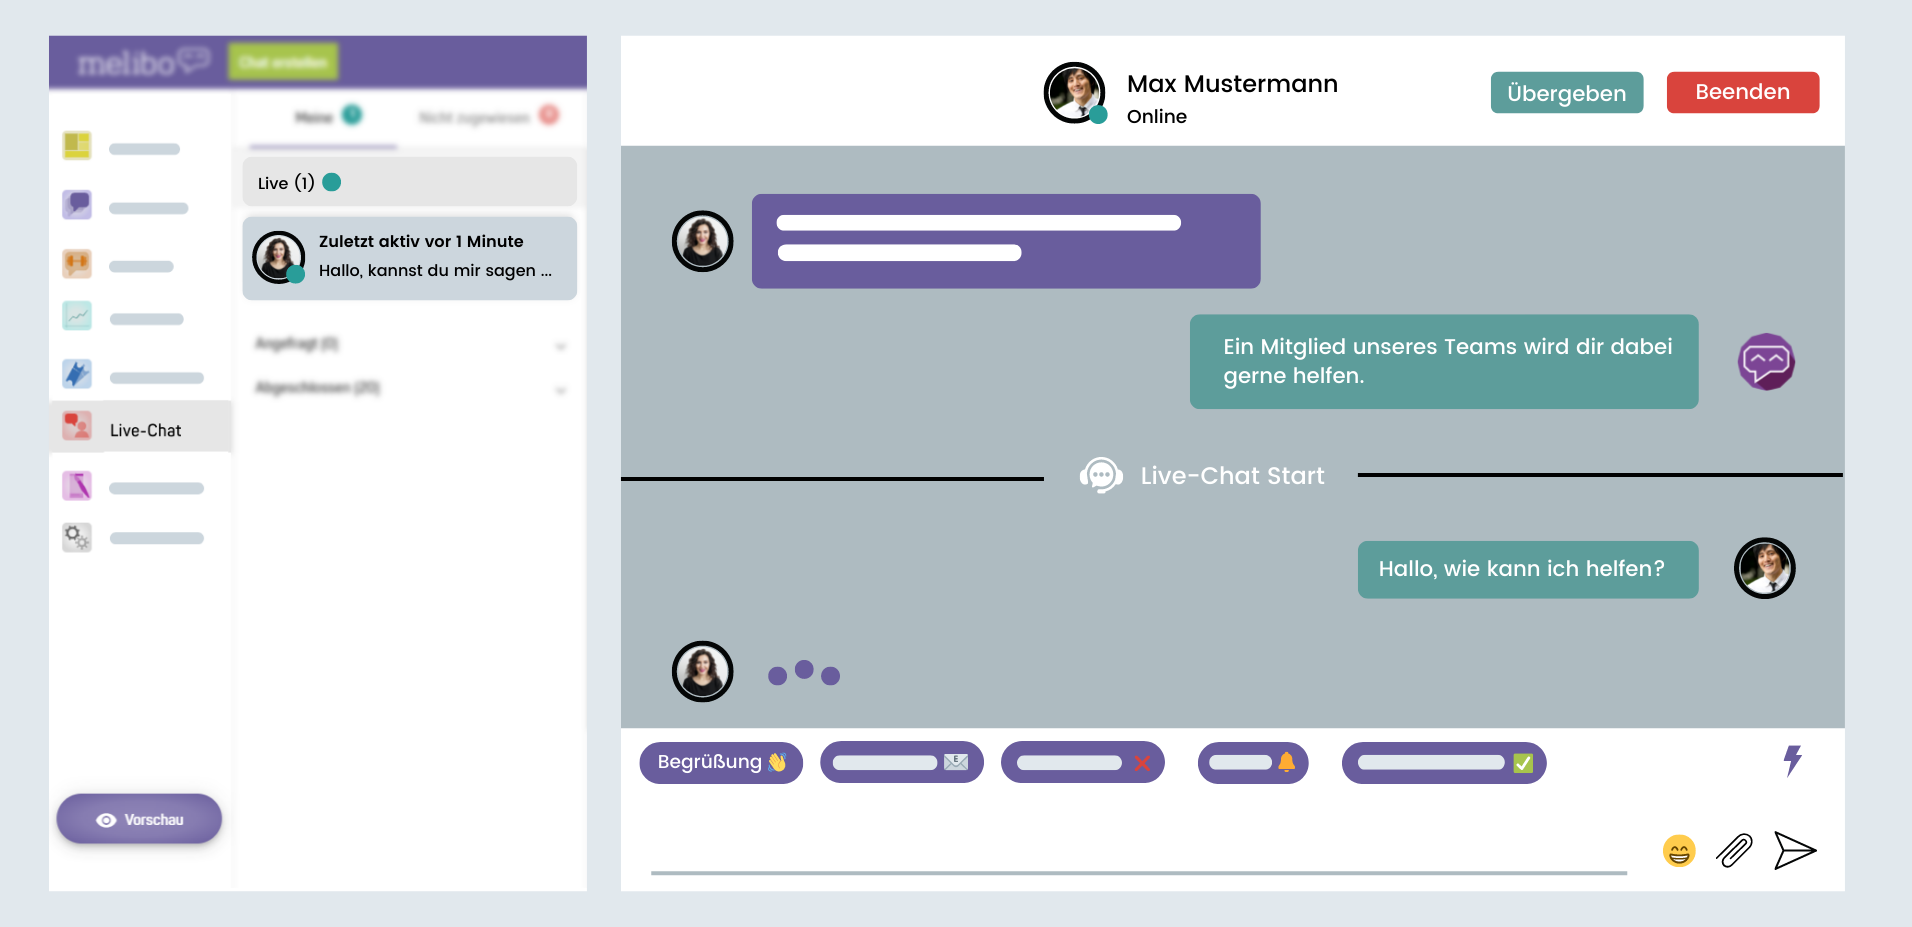 Live Chat - The live chat and melibo's chatbots are perfectly matched